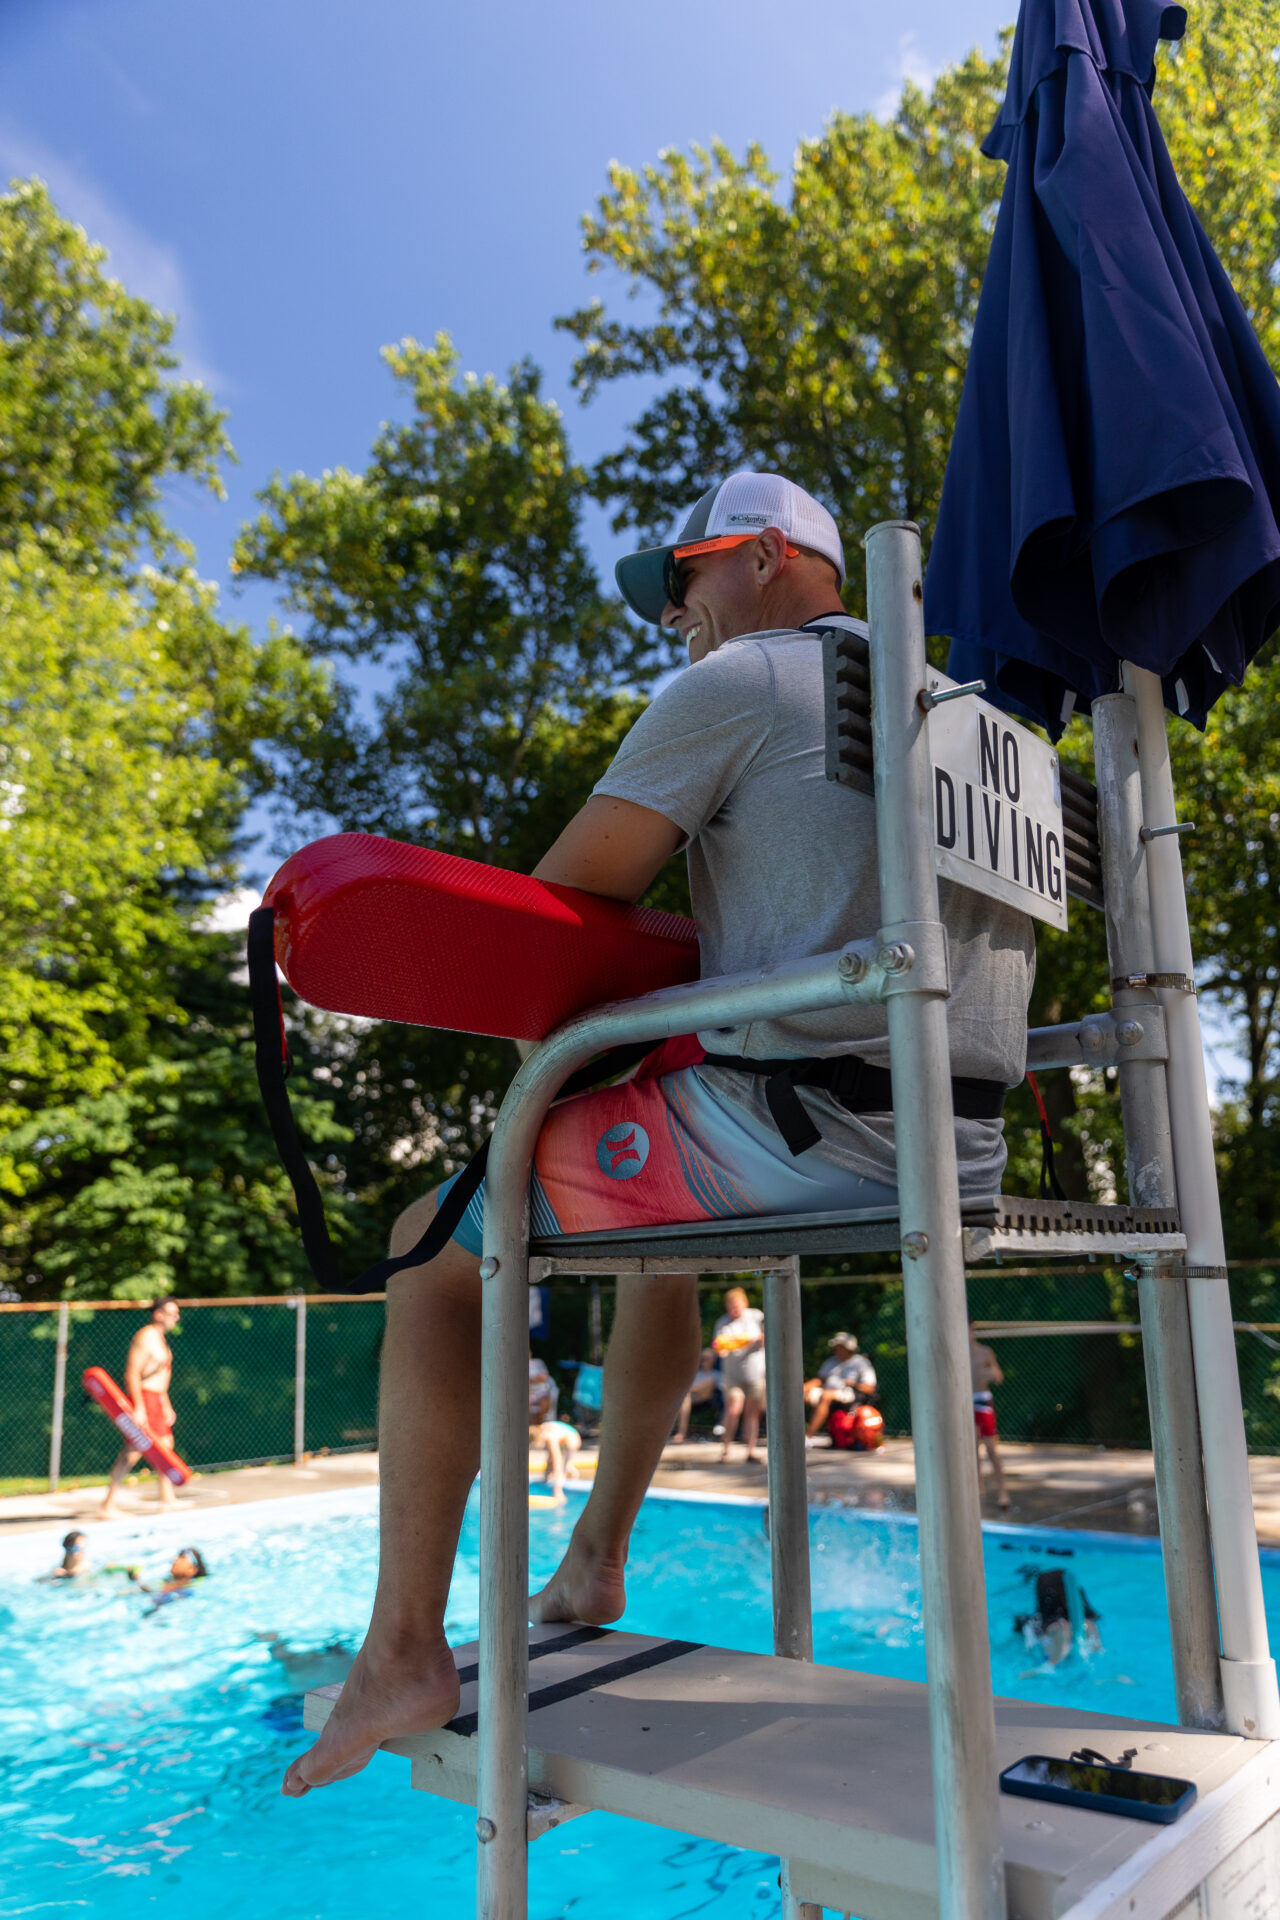 A BearTrax-equipped man on a lifeguard stand.